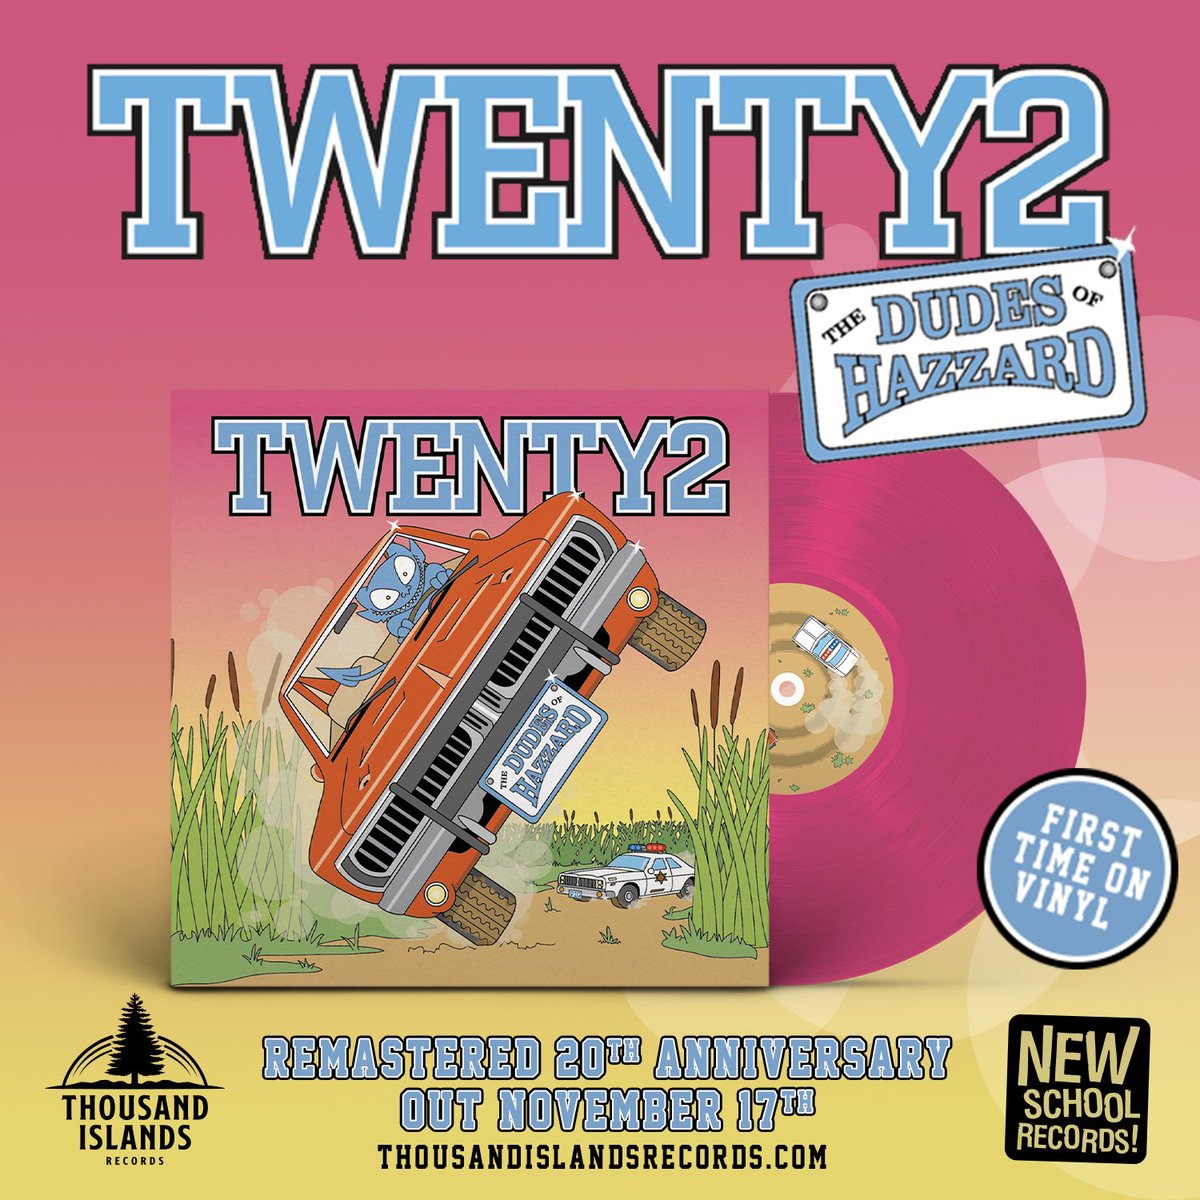 Happy release day to Twenty2! ‘The Dudes of Hazzard’ 20th Anniversary Remastered Edition is out now everywhere. Check it our via your preferred digital platform and secure a vinyl copy in our store! thousandislandsrecords.com/2023/11/06/twe…